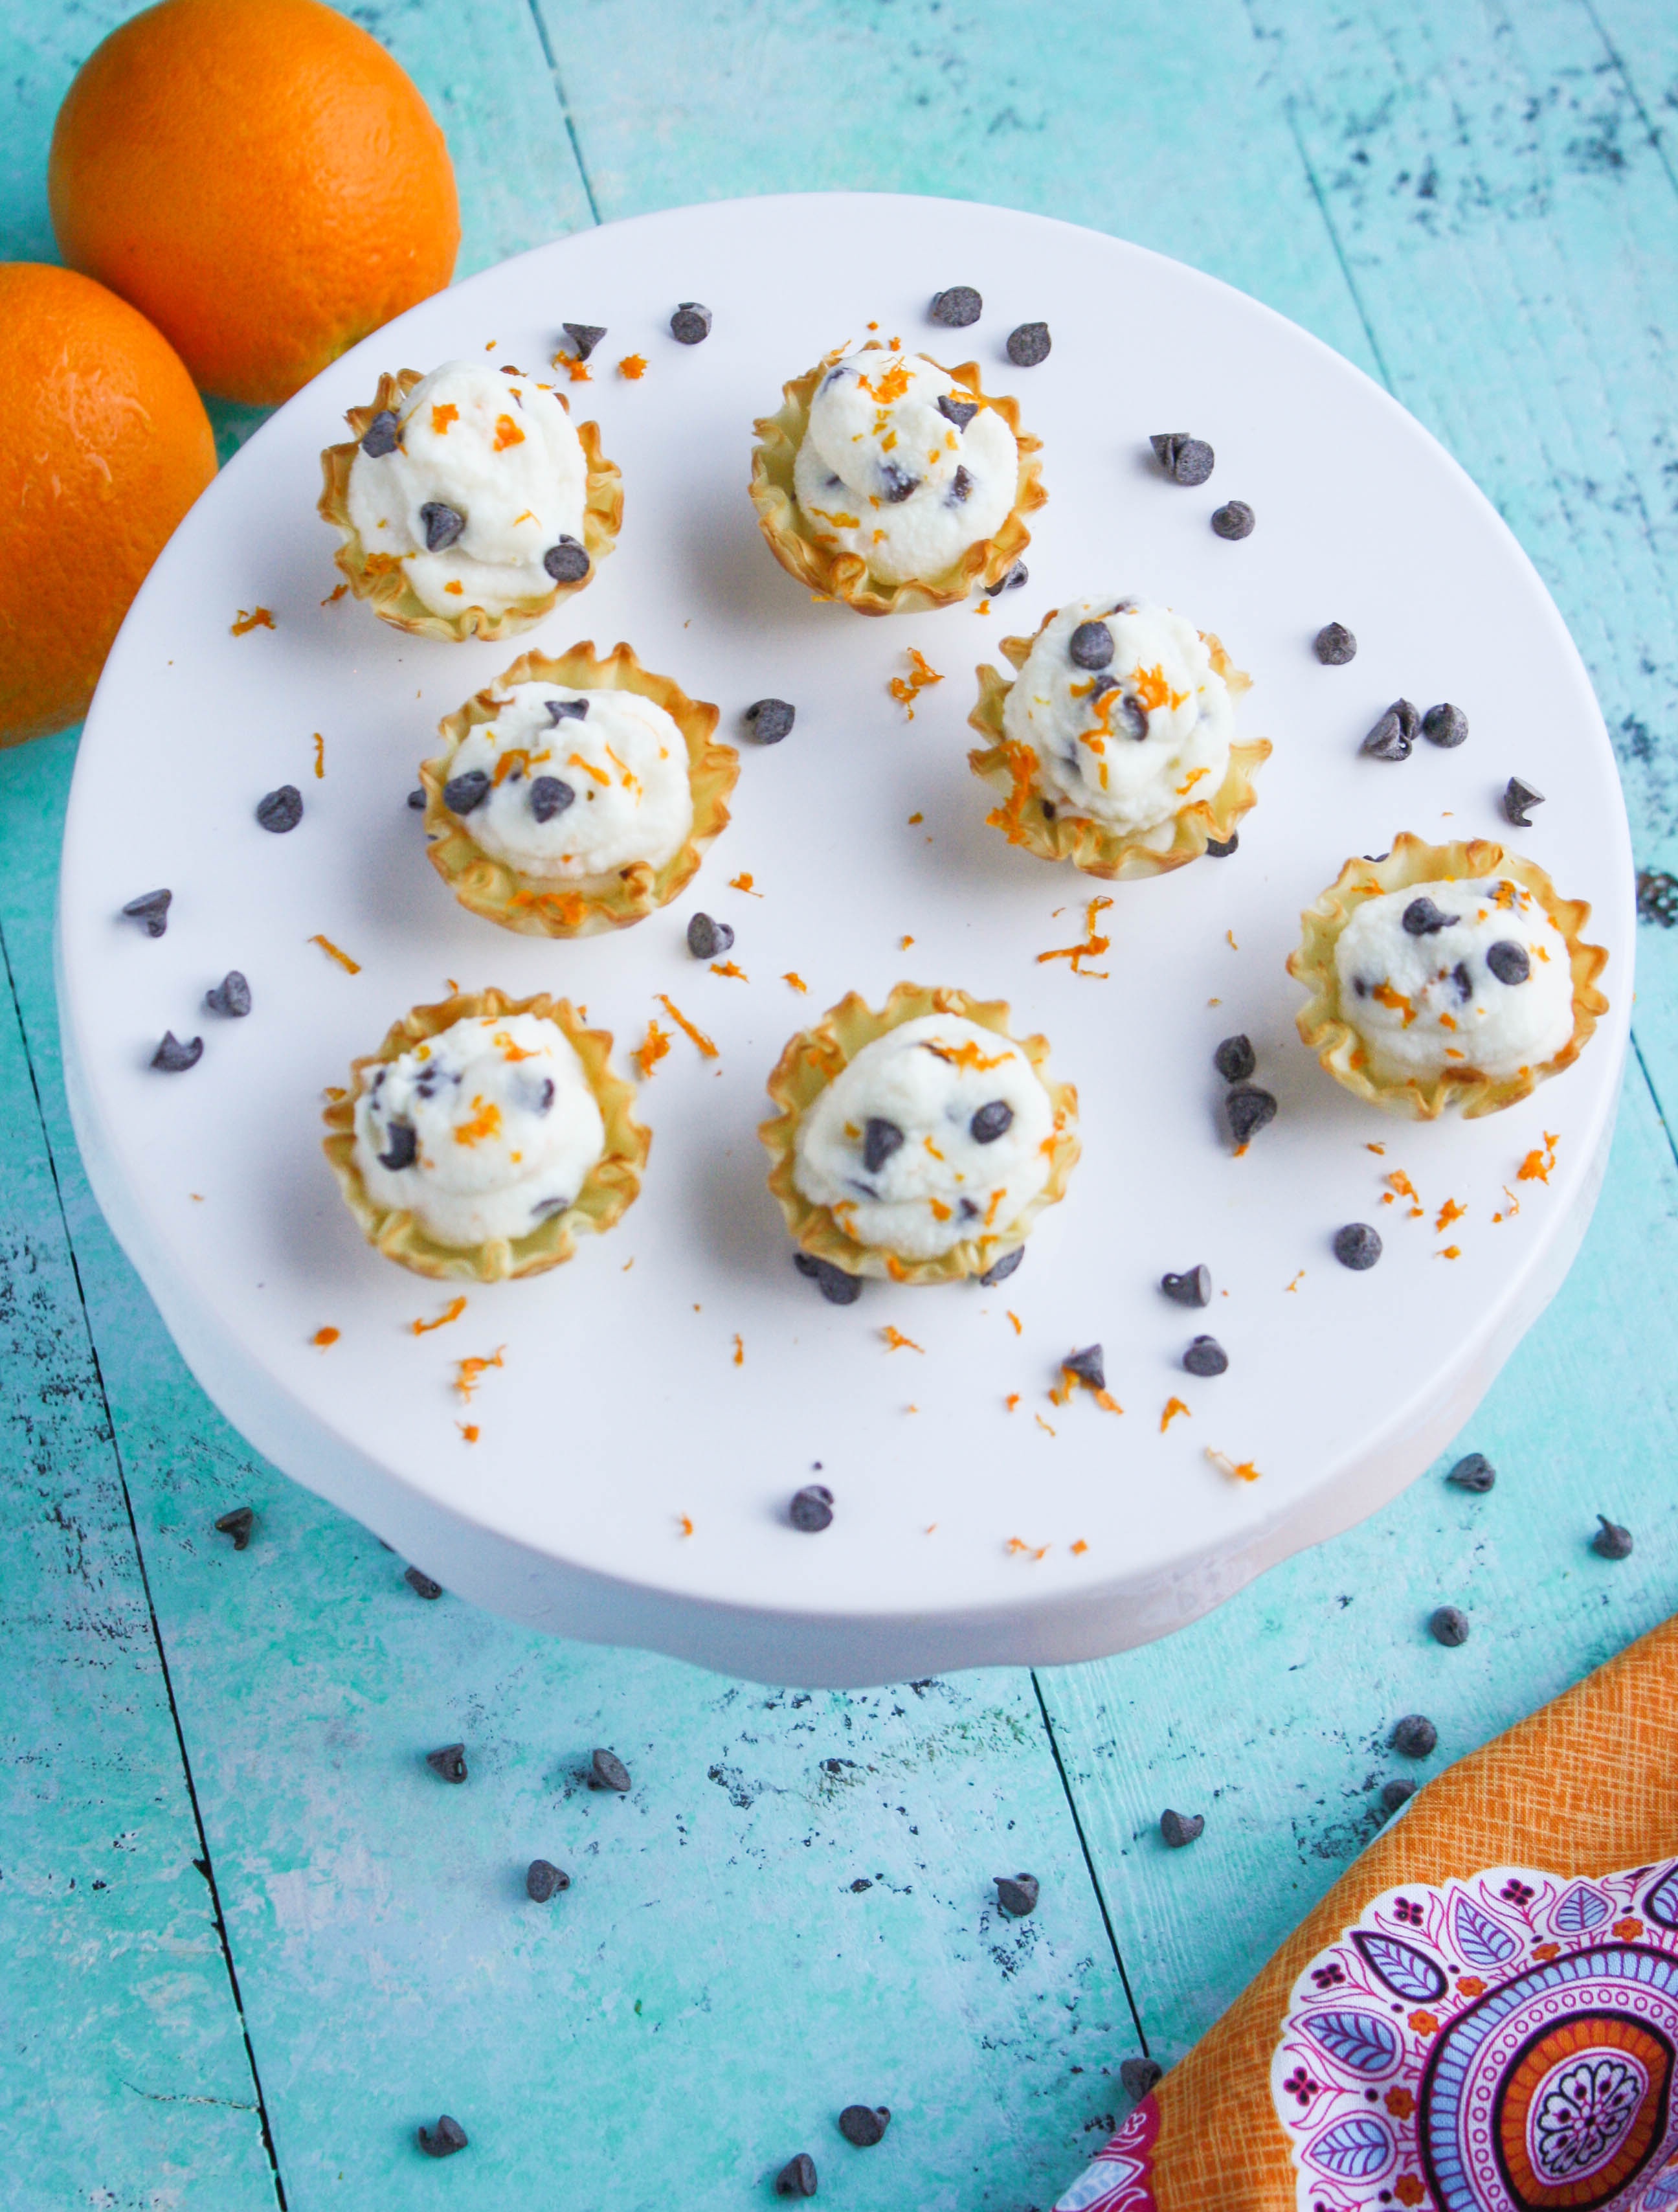 Easy Chocolate Chip-Orange Cannoli Cups are a fabulous treat and so easy to make, too! You'll love these cannoli cups for a special treat!